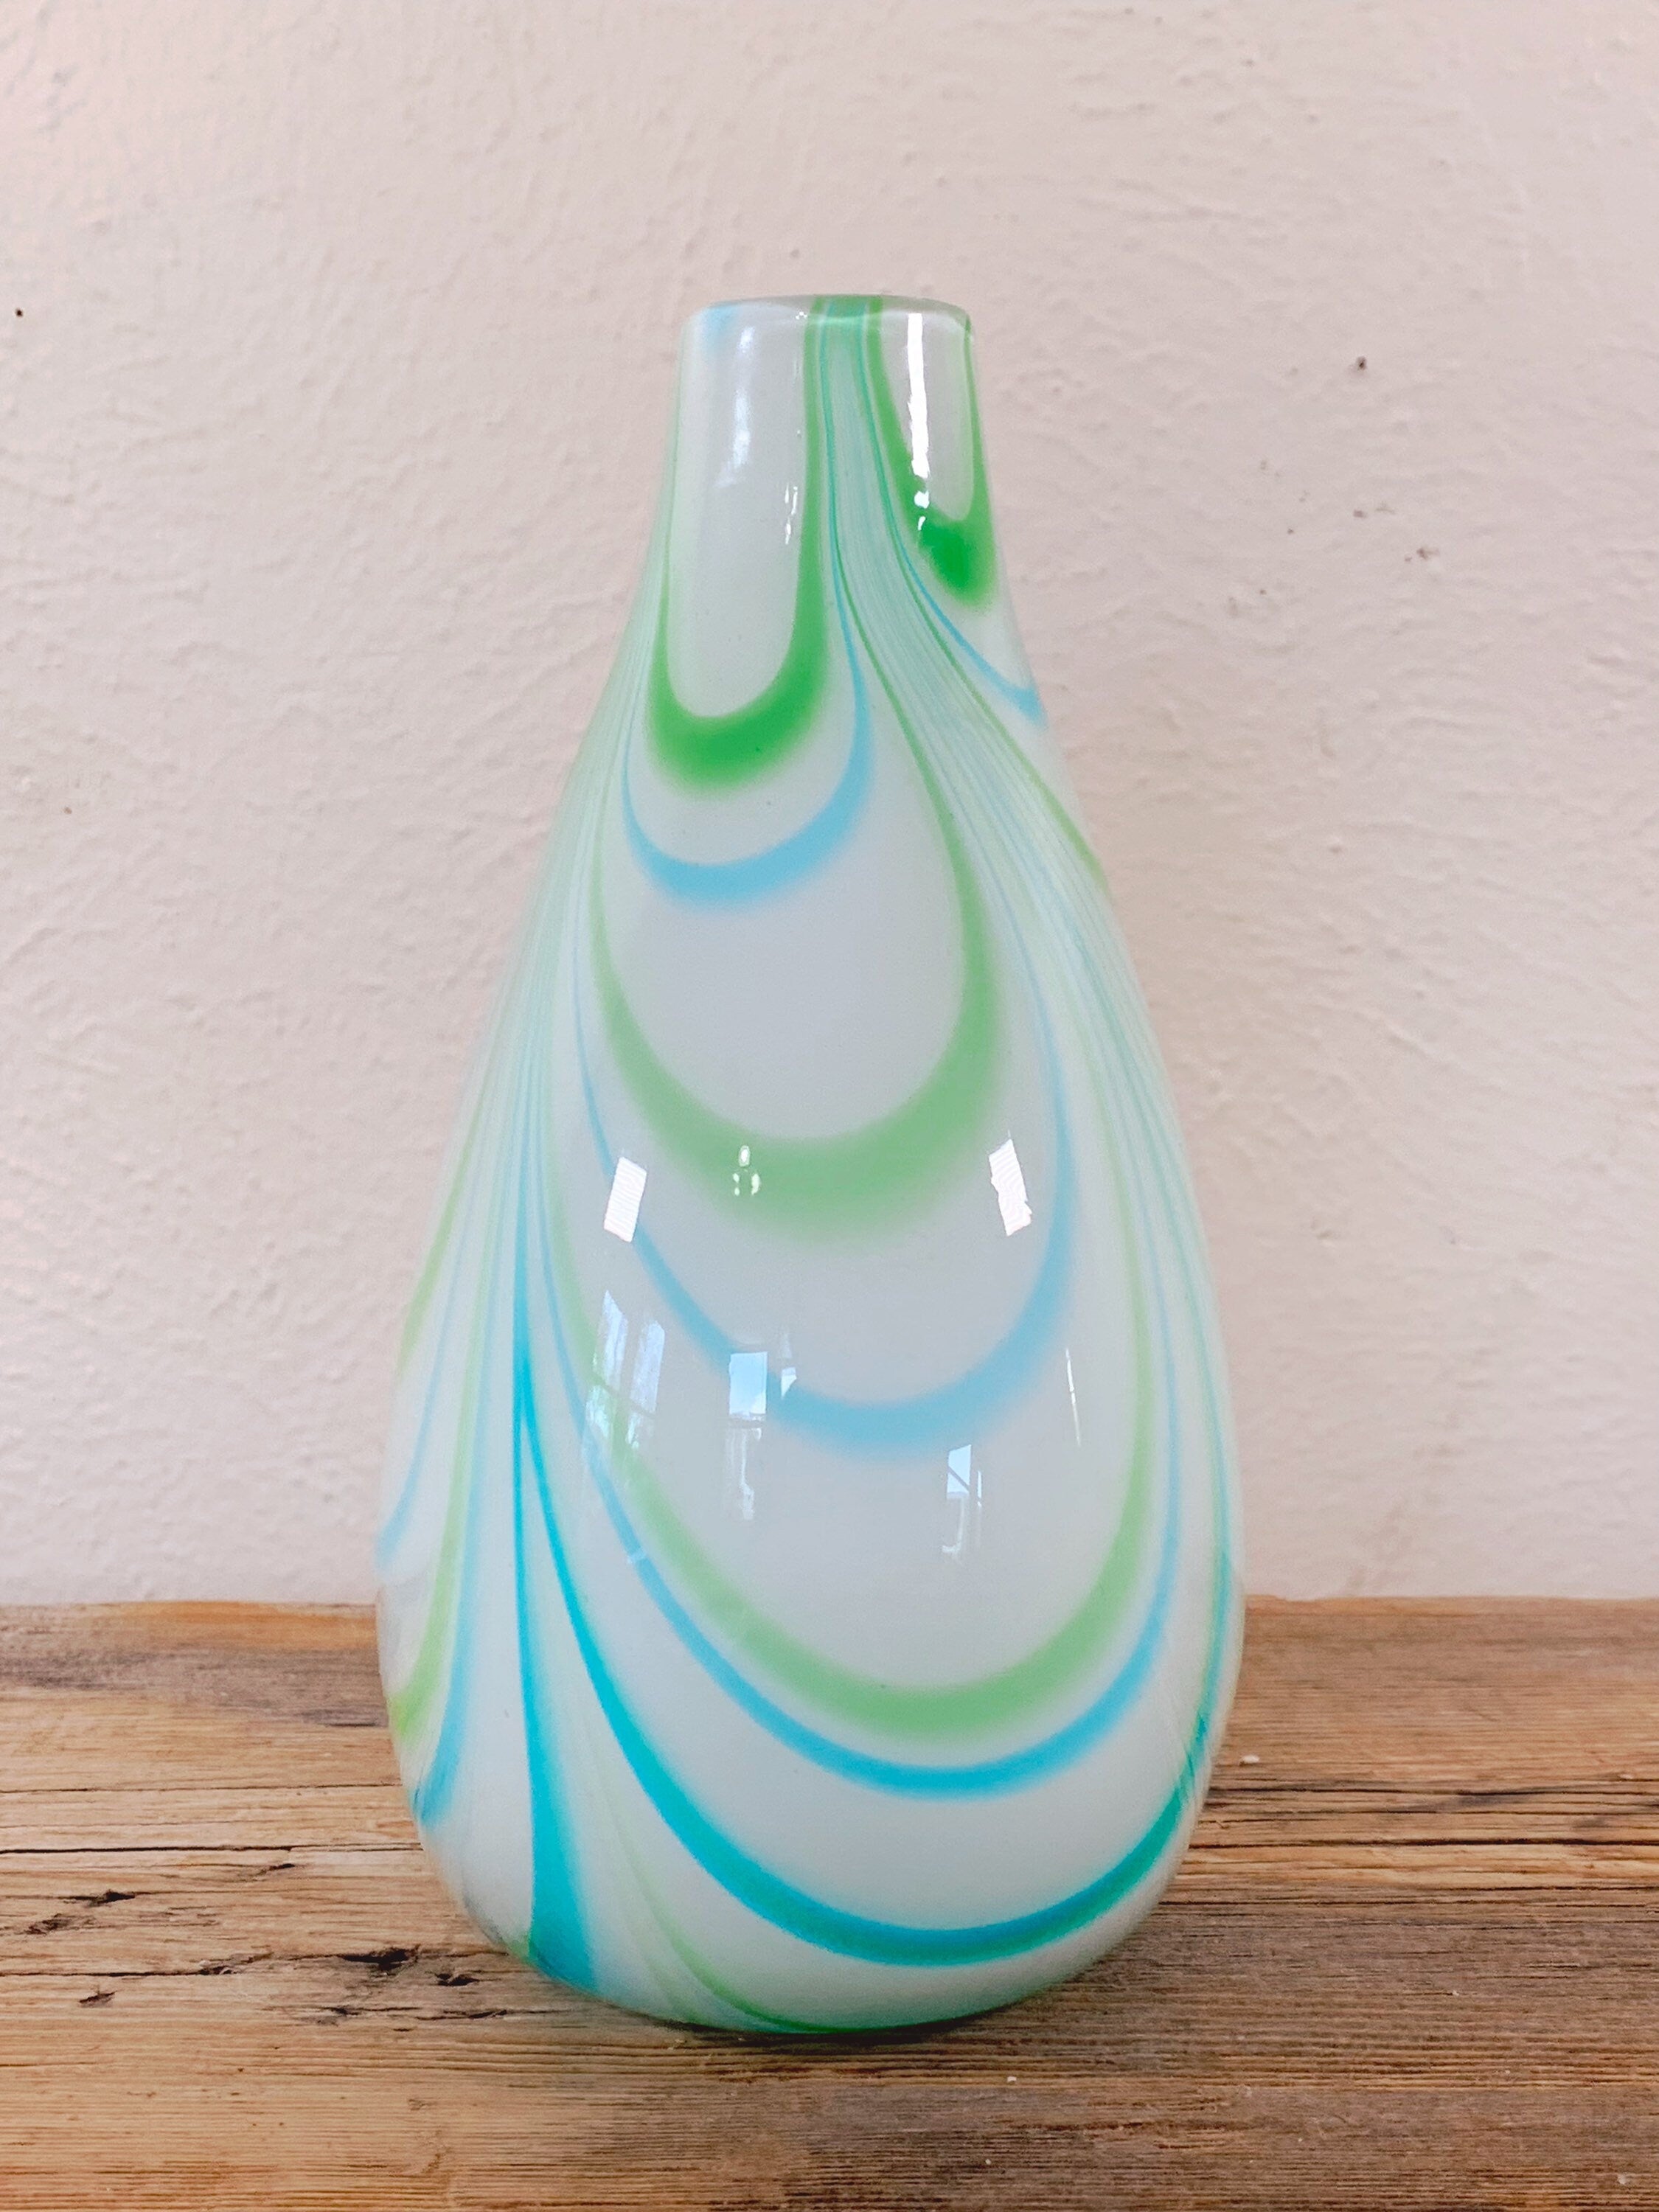 Vintage Hand Blown Studio Art Glass Vase with Blue and Green Candy Stripes | Flower Vase Contemporary Home Decor | Mother's Day Gift